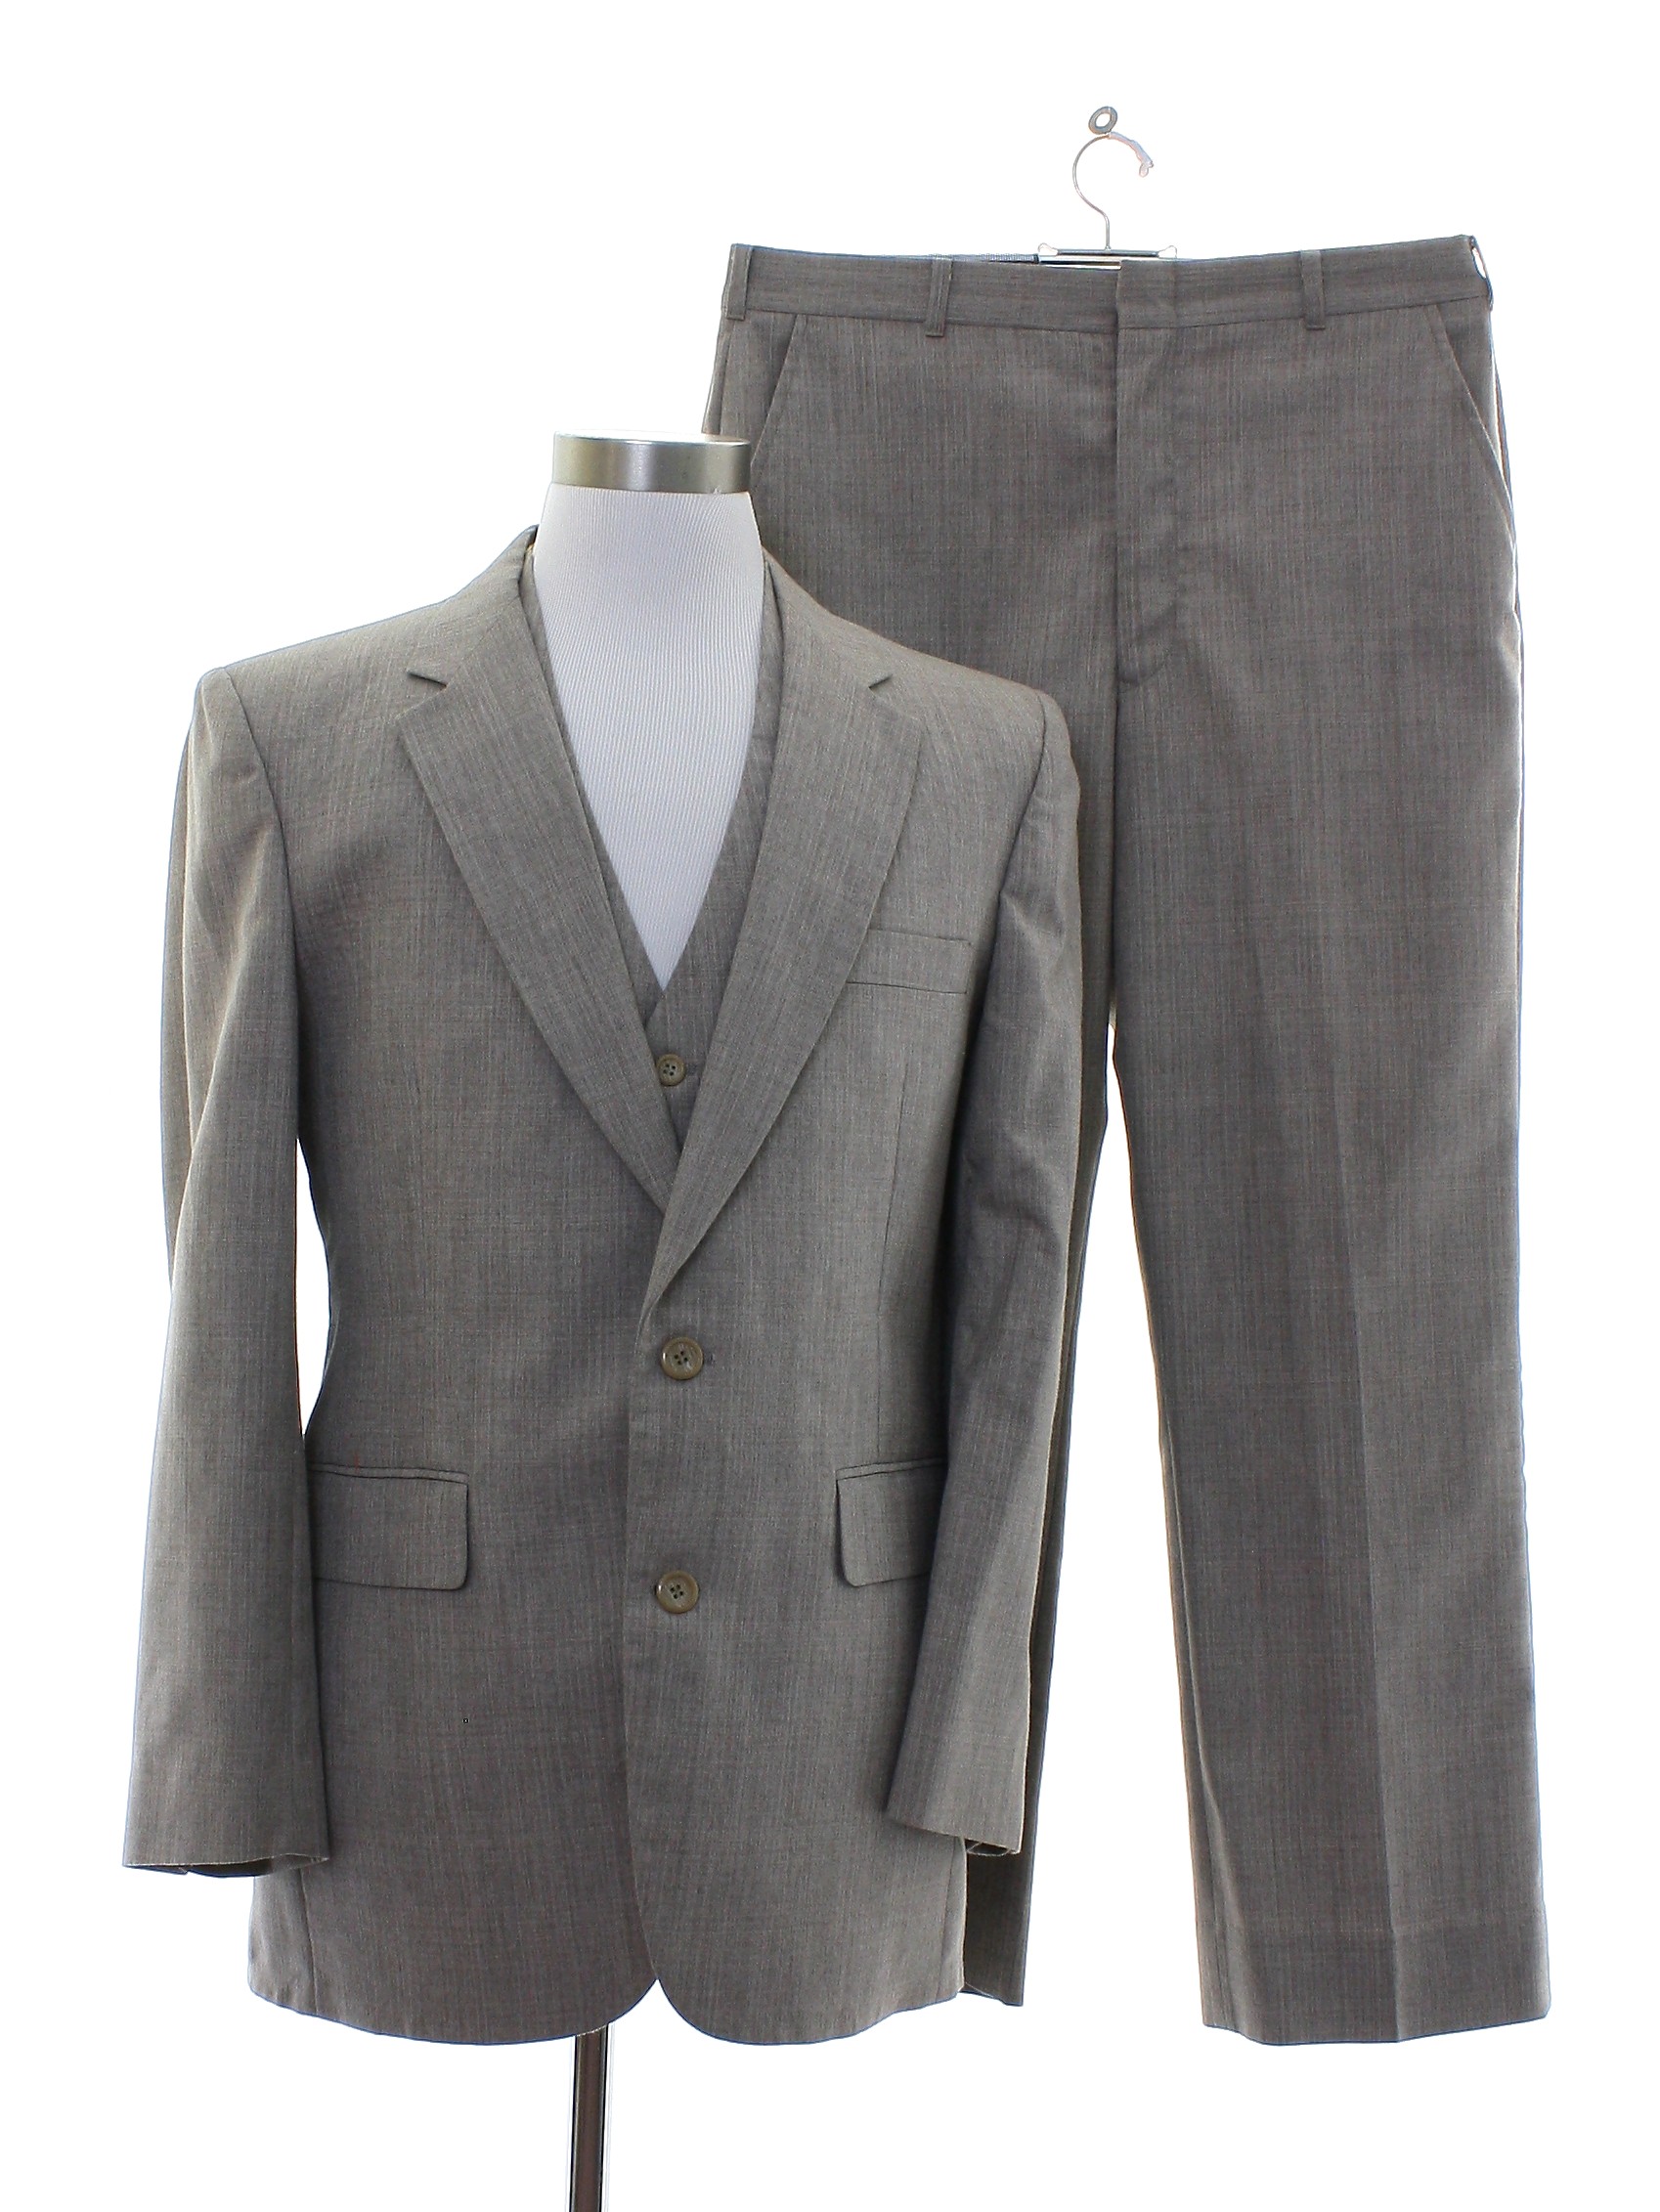 Eighties Vintage Suit: Early 80s -Playboy- Mens taupe heather blended ...